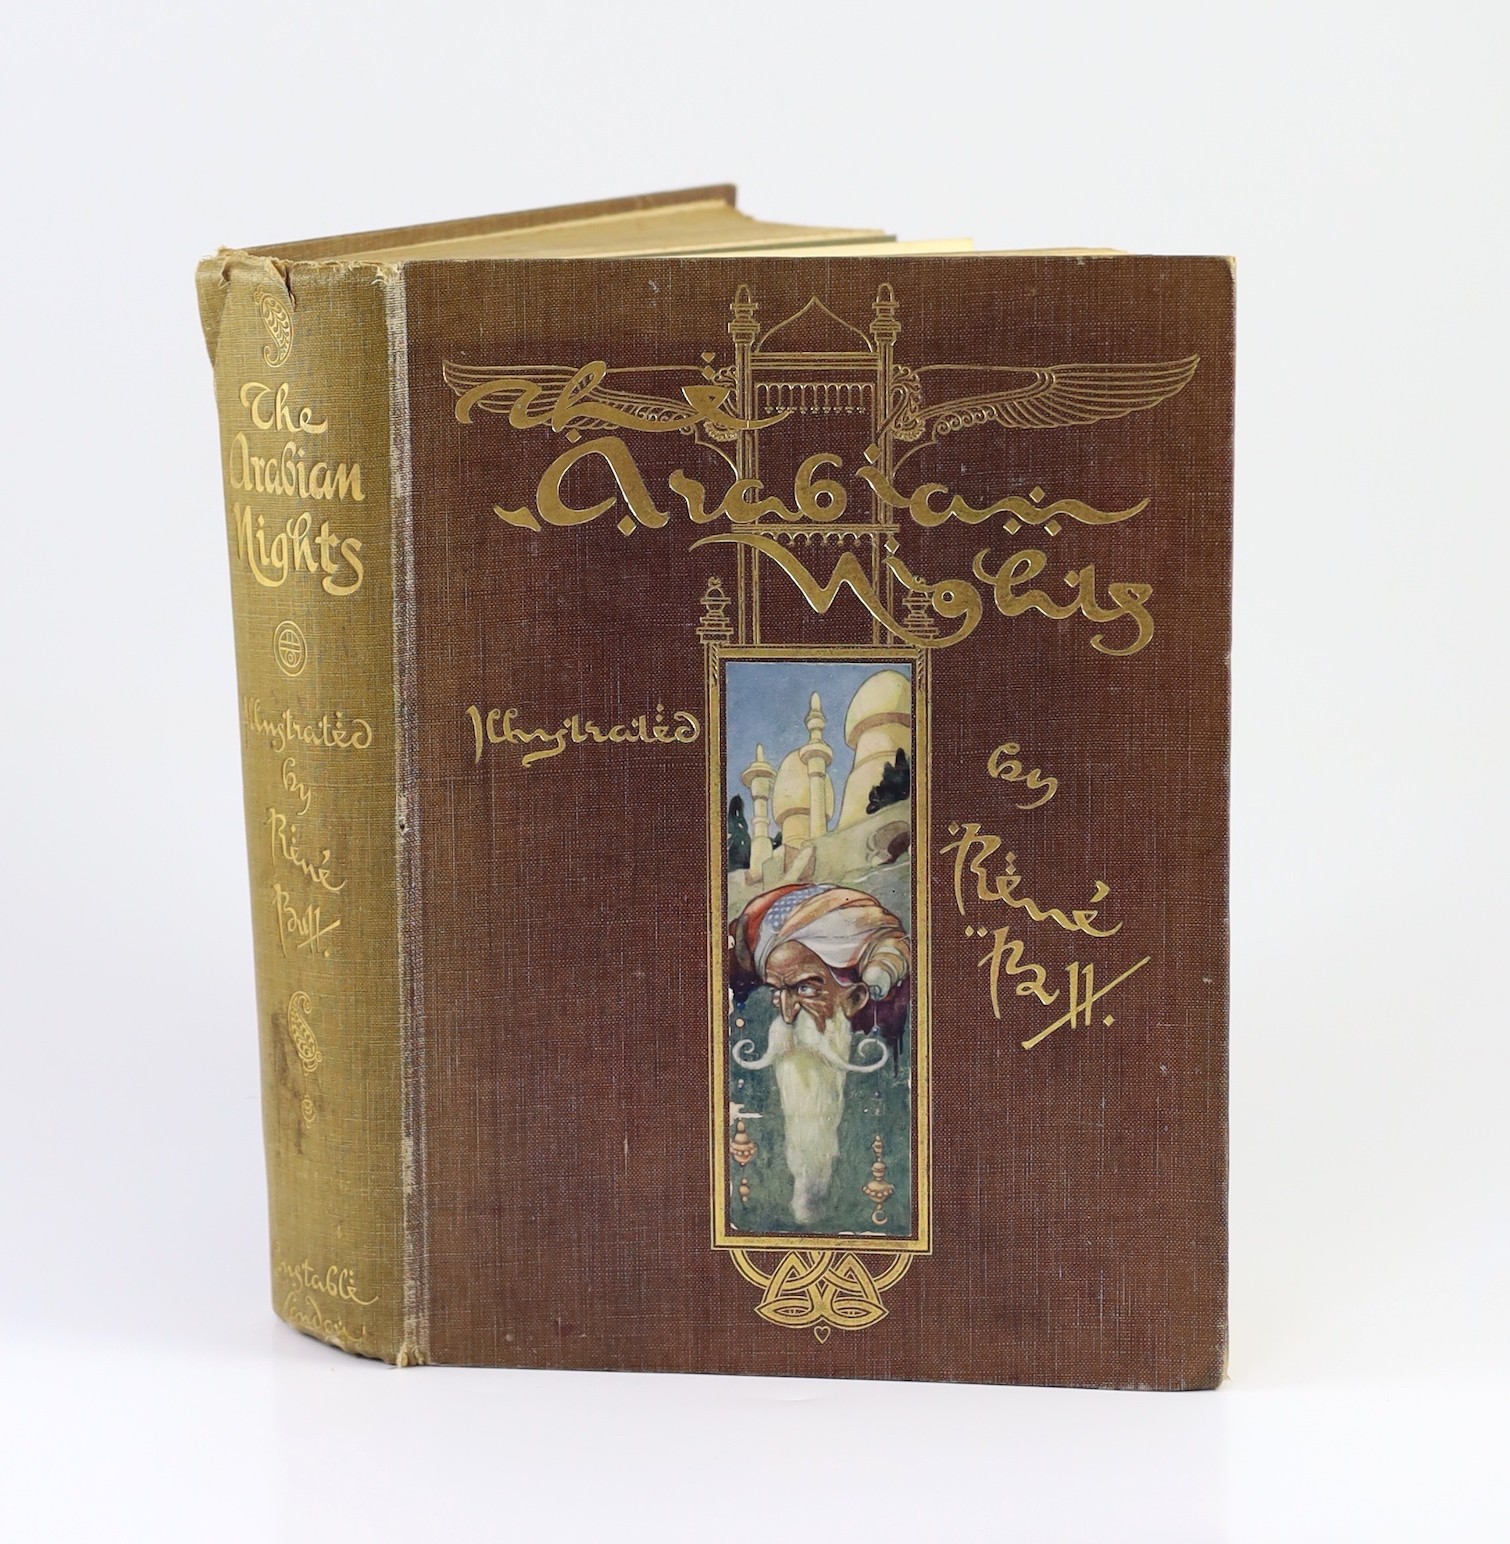 Arabian Nights - The Arabian Nights, illustrated with 20 colour plates by Rene Bull, 4to, pictorial cloth gilt, spine sunned and with small tears, Constable & Co., London, 1912